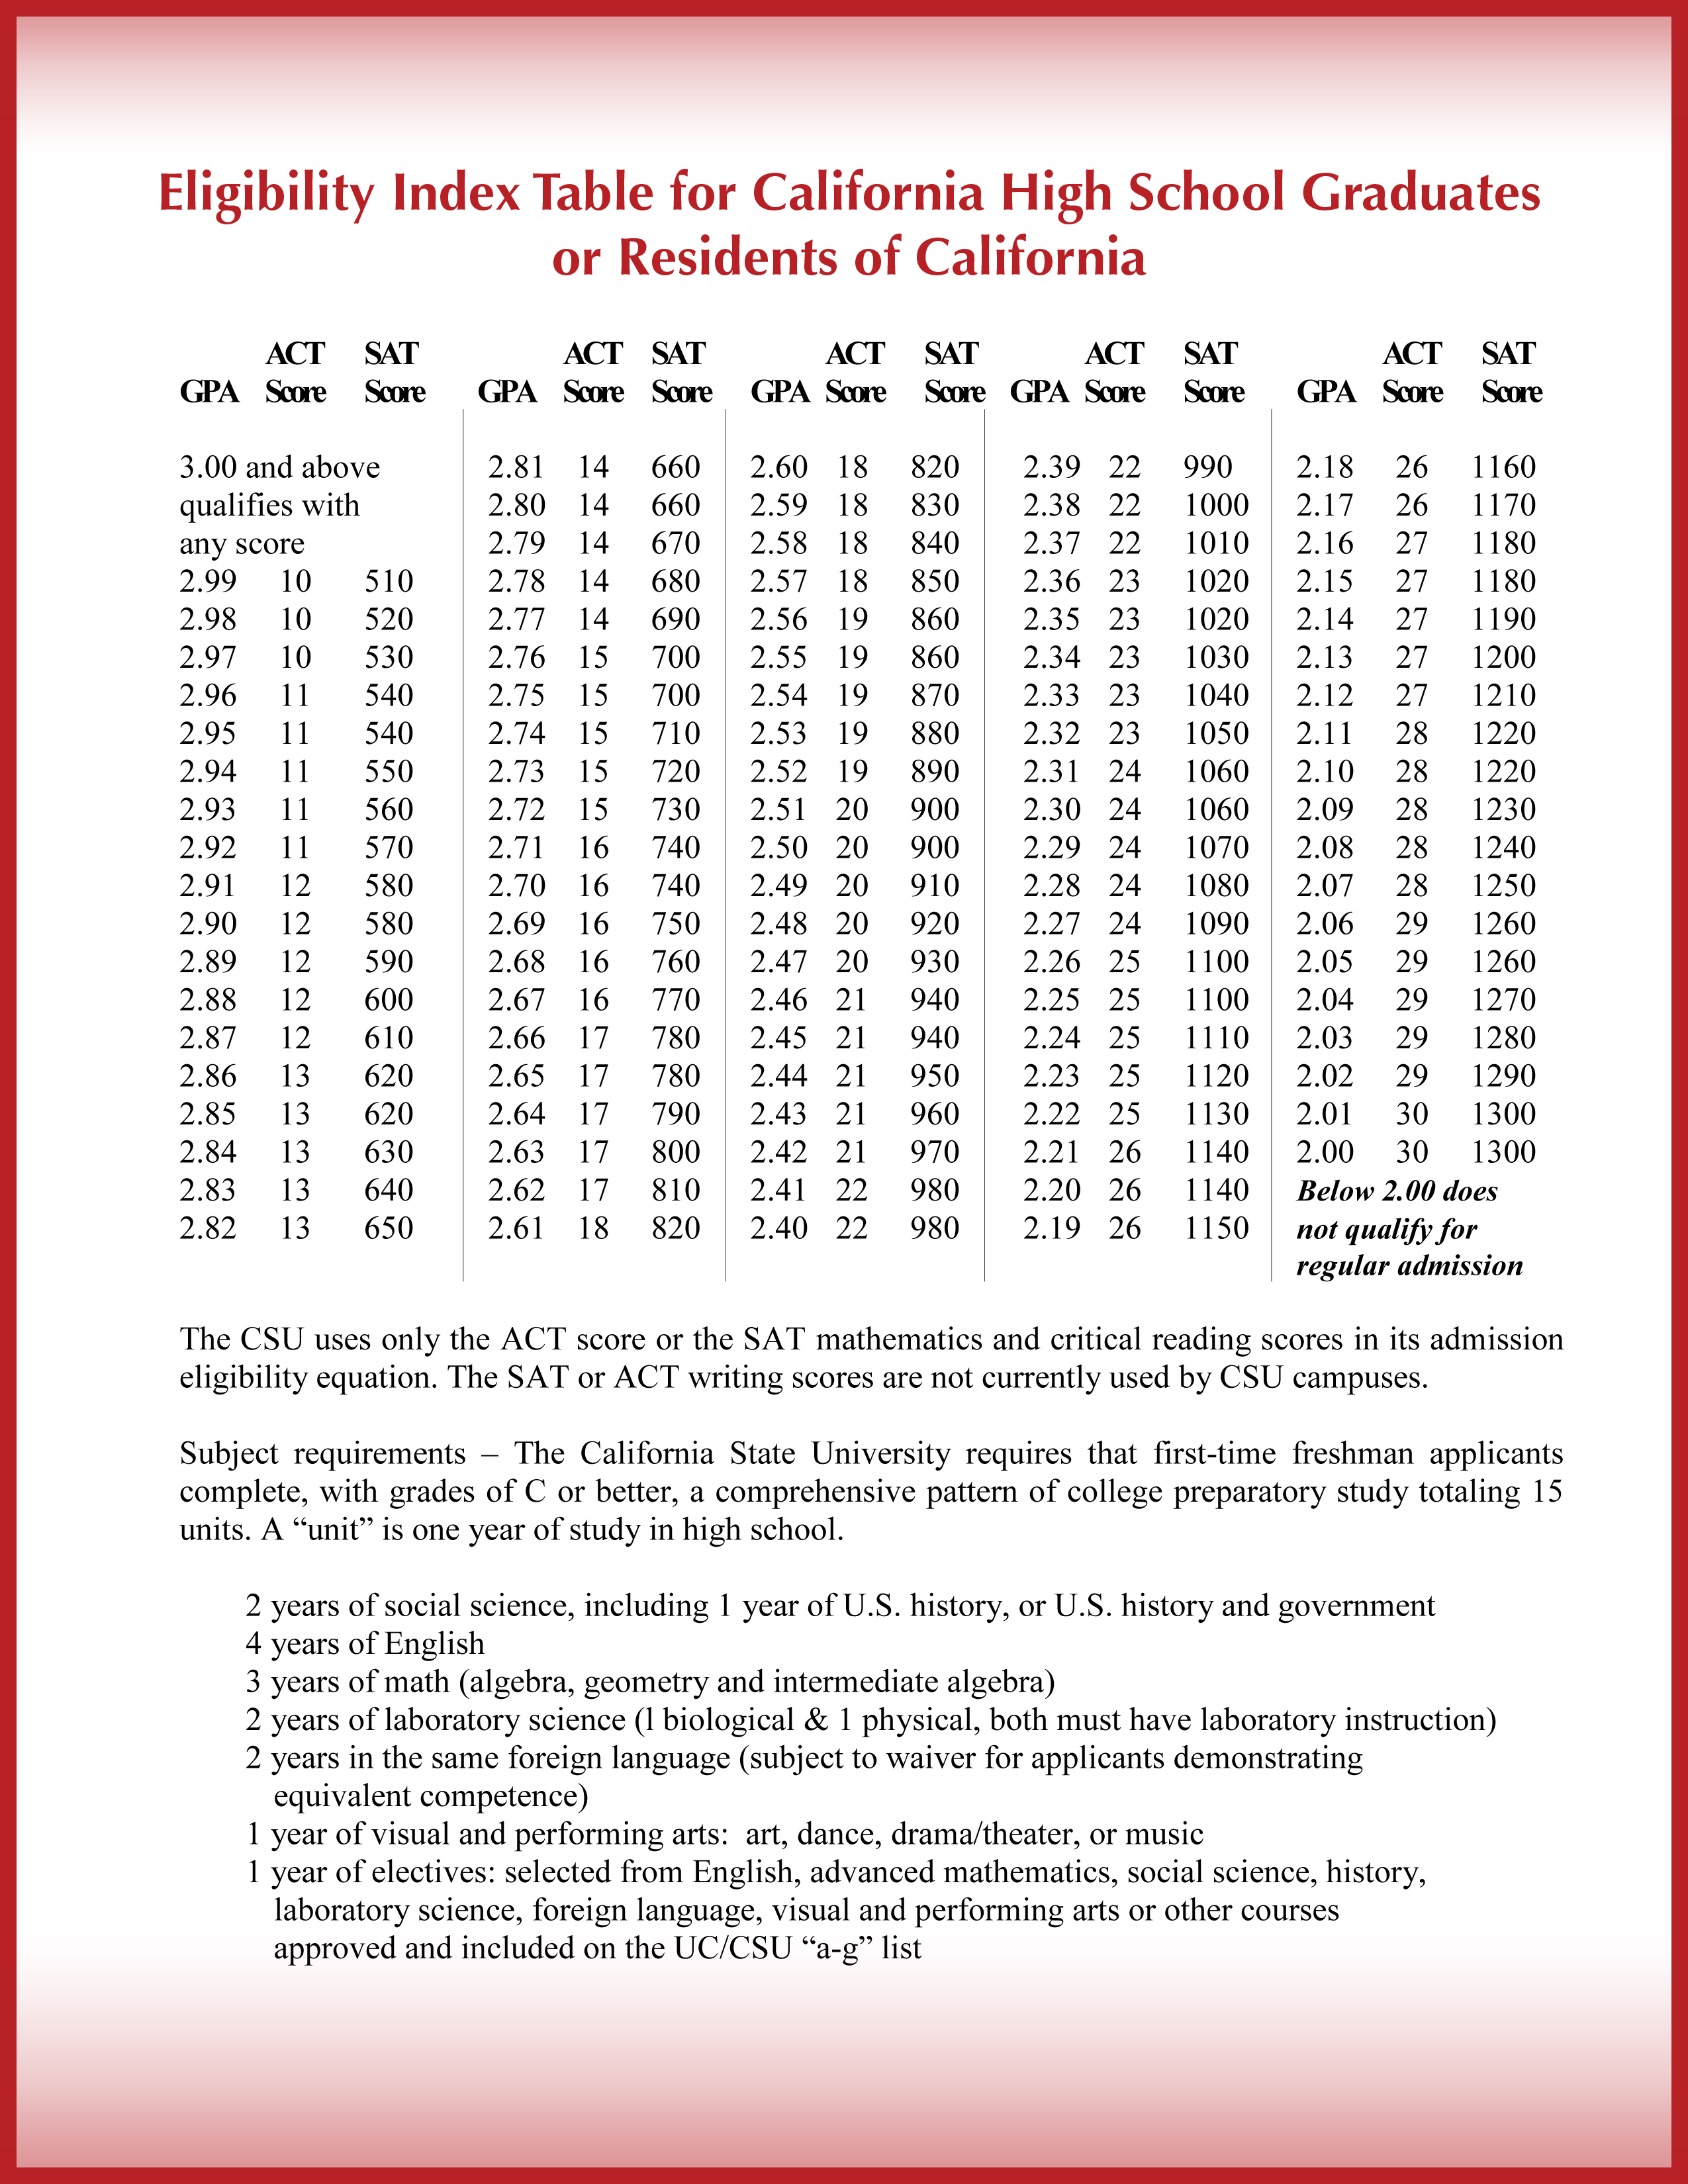 This is a table that illustrates a rubric for determining eligibility for admission to a California State University (CSU).  It lists three columns; GPA; ACT score; SAT score.  For each GPA between a 3.00 and a 2.00 is listed (by hundredths) with a qualifying score on each the ACT test and SAT test.  Example: 2.99 GPA needs ACT score of 10 or SAT score of 510.